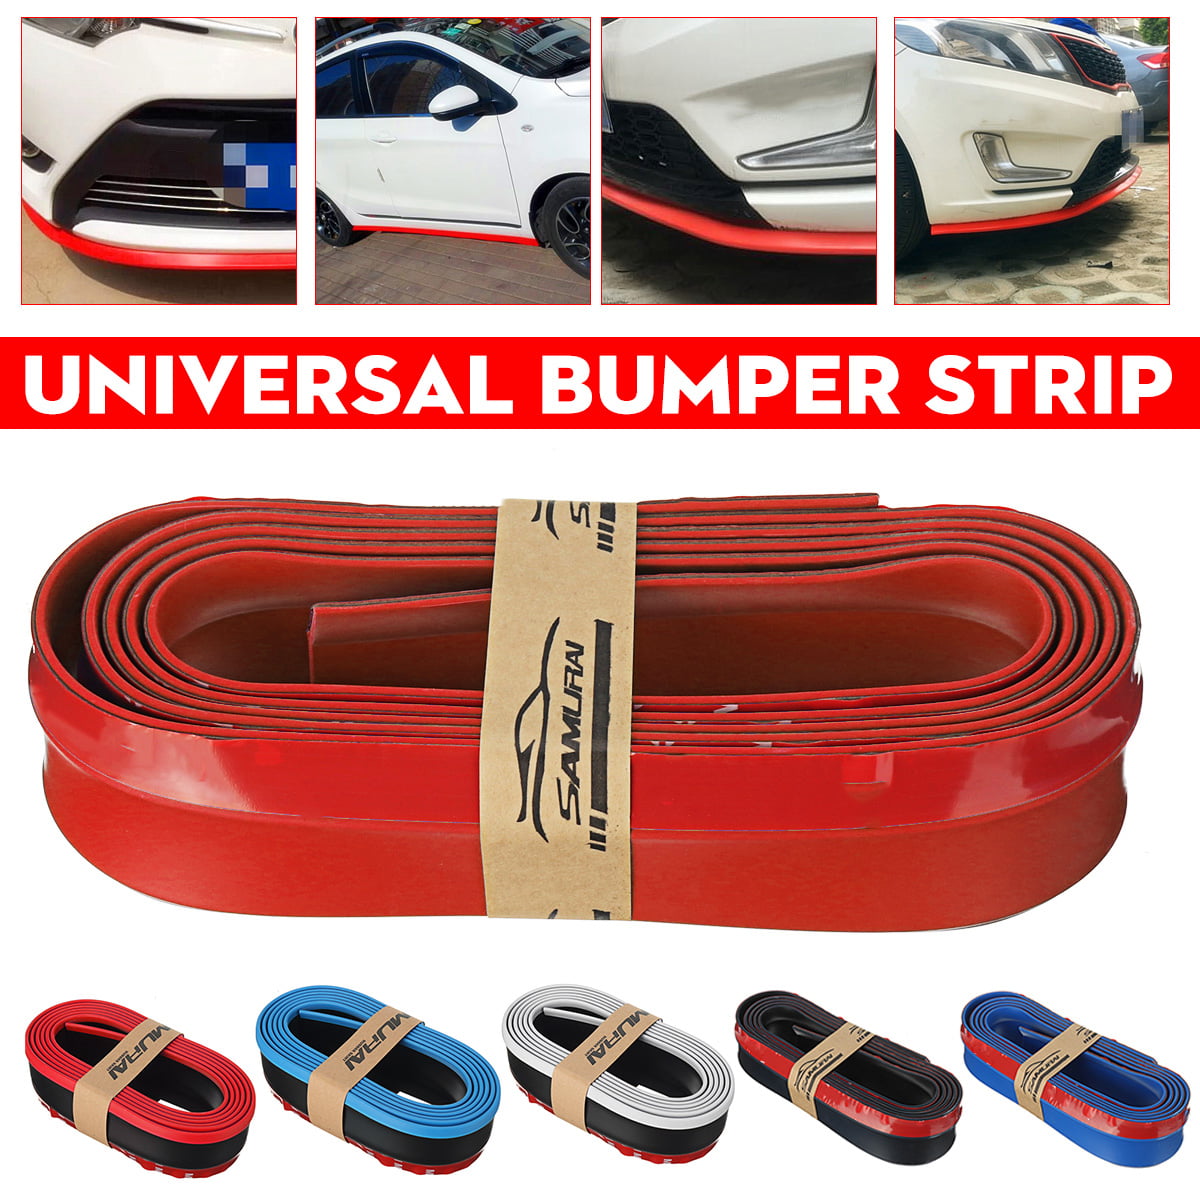 Universal Car Bumper Protector Rubber Anti-Collision Front and Rear Rubber Strips for Car Bumpers Side 8 Pieces Not Easy to Fall Bumper Protector Trim Guard Strip for Sedan SUV MPV Pickup Truck 